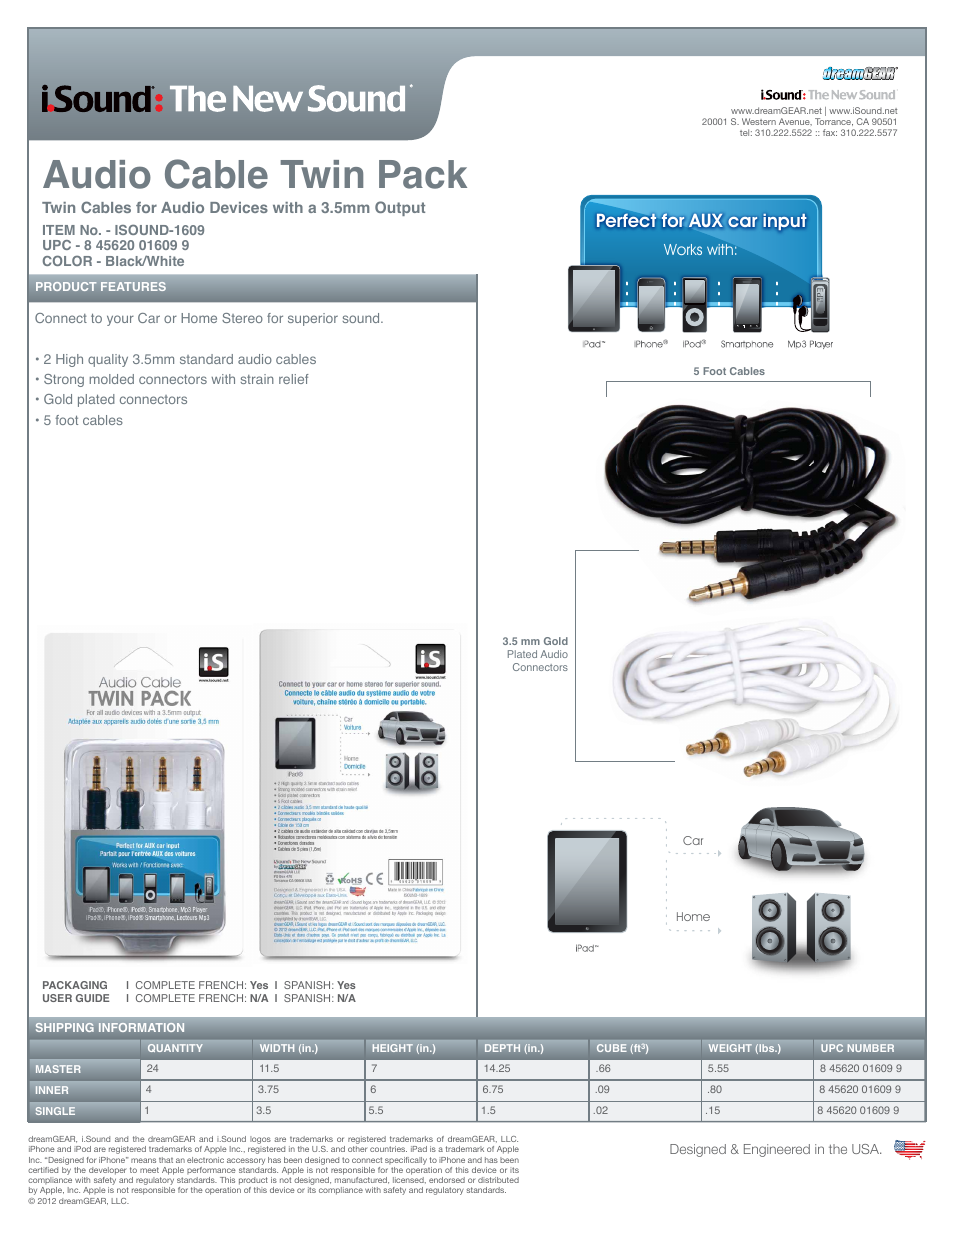 Audio Cable Twin Pack - Sell Sheet